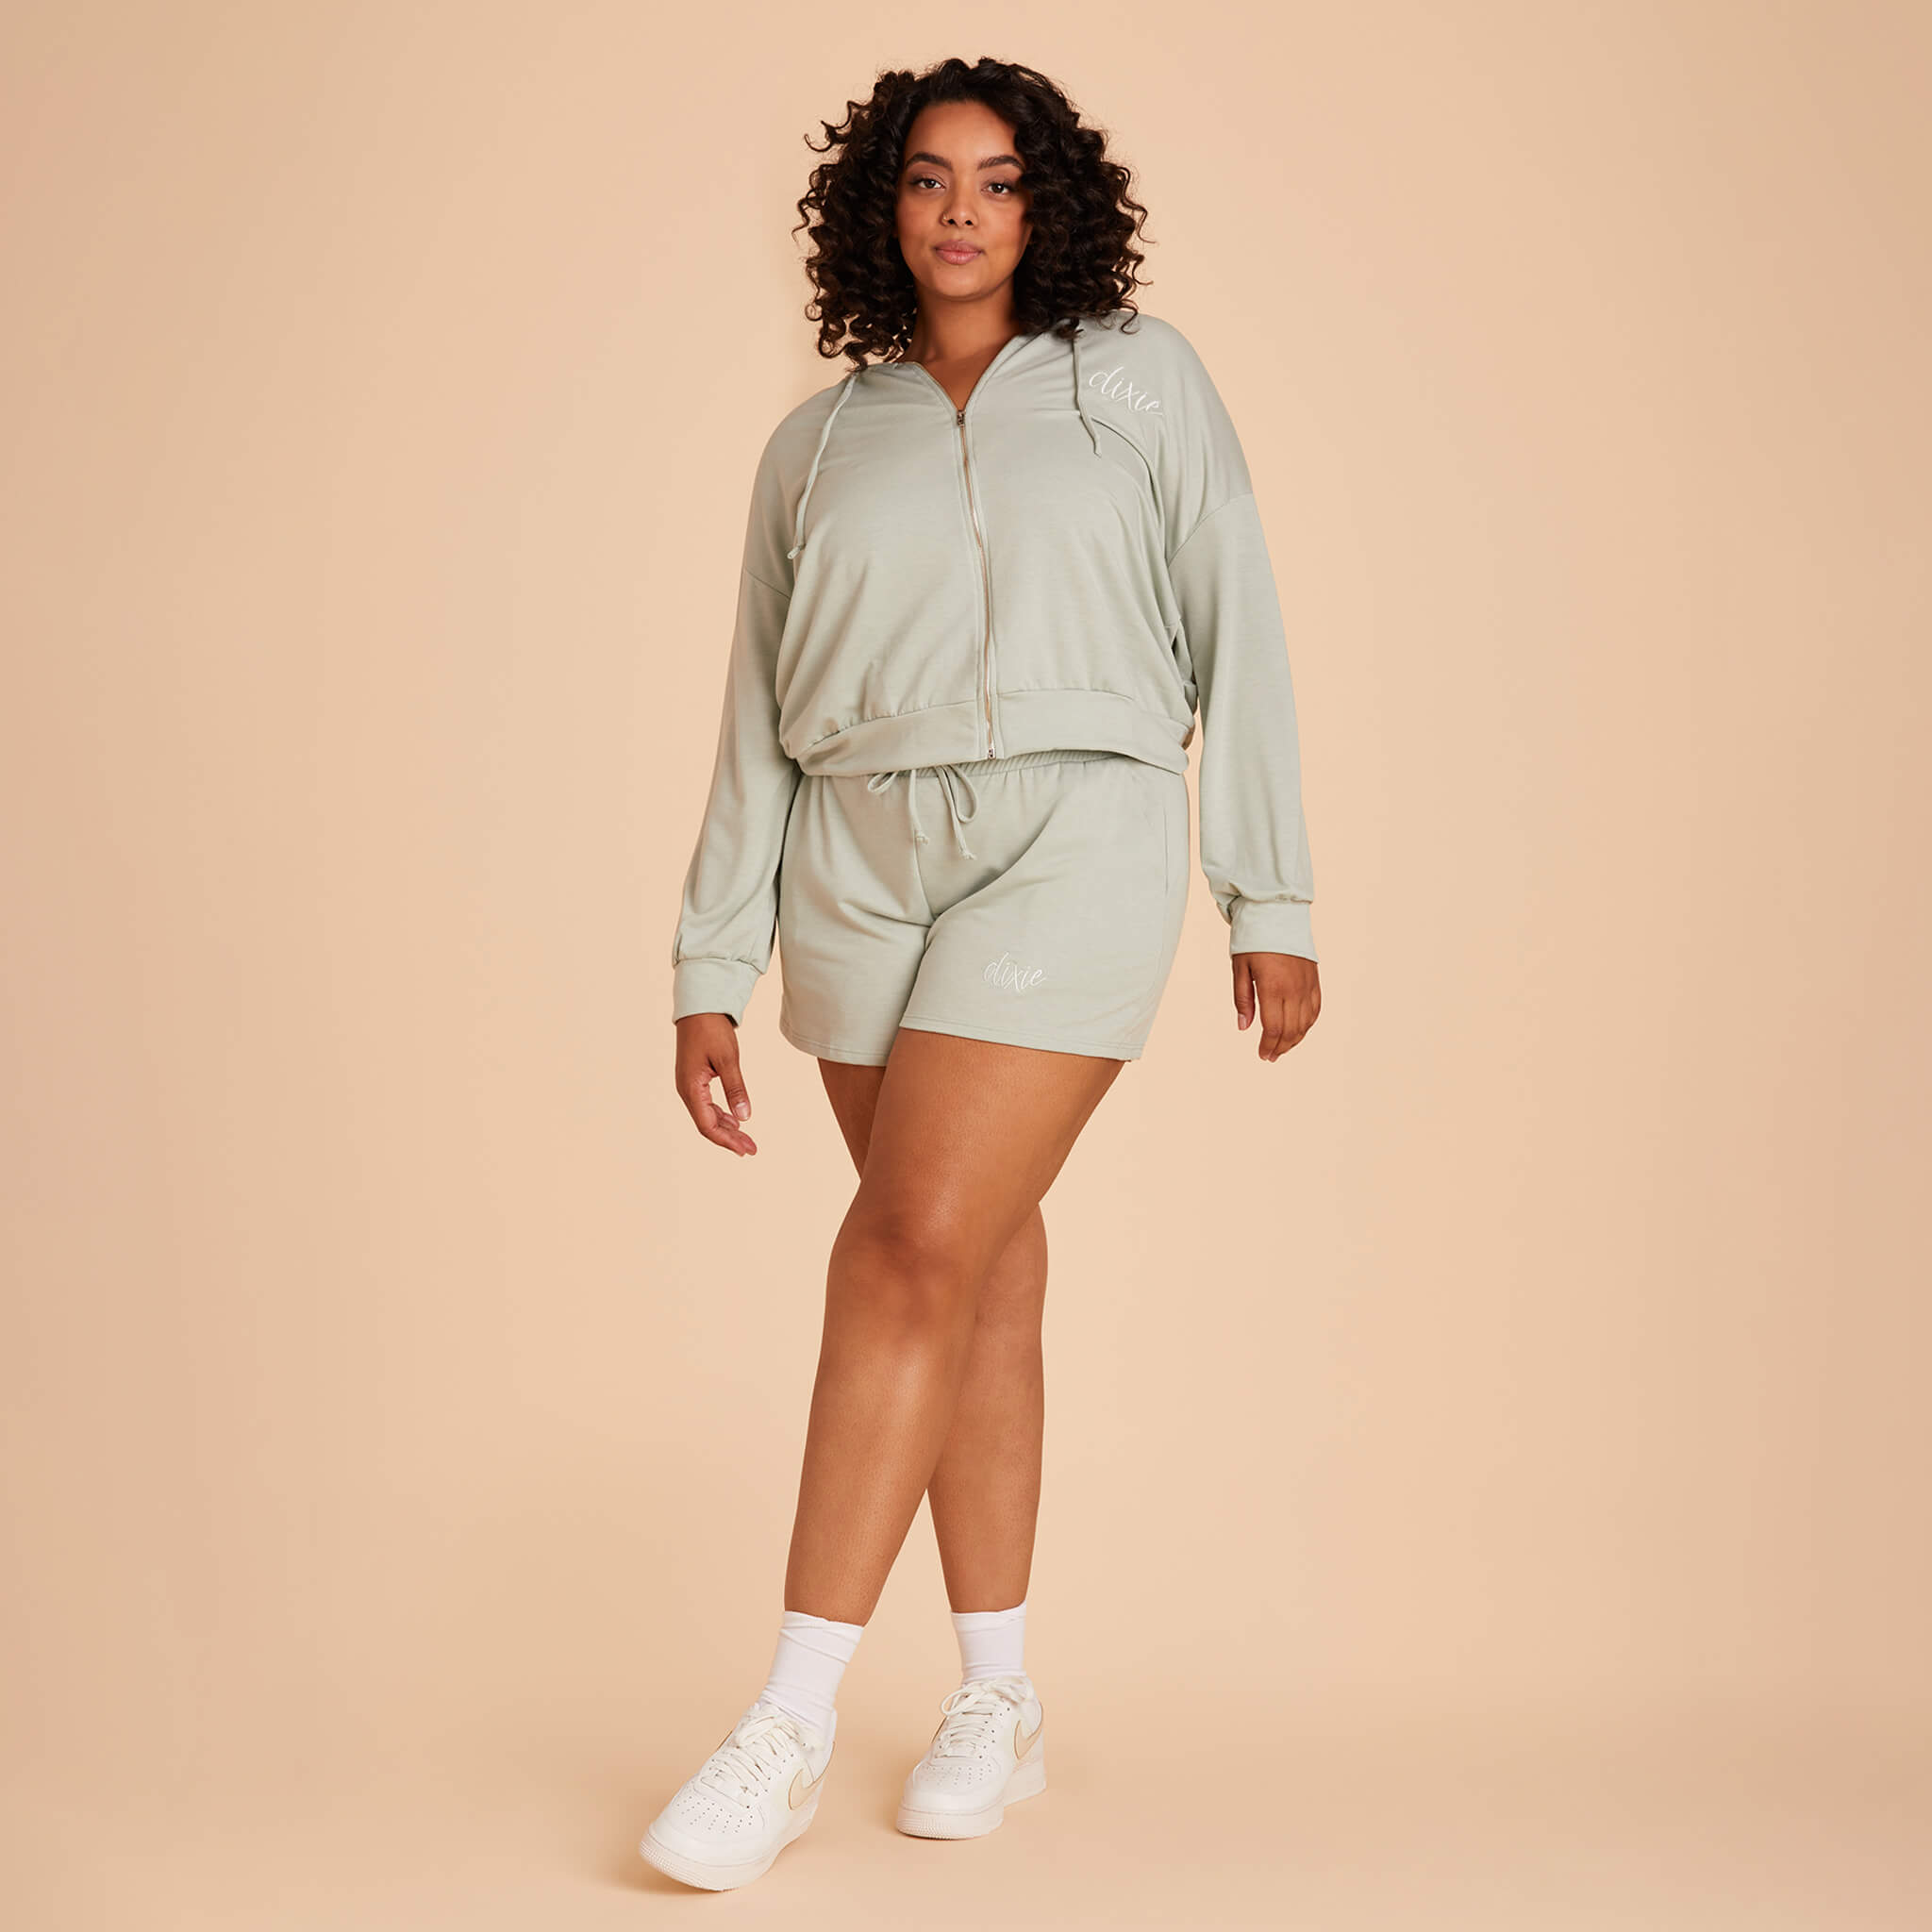 Plus Size hoodie and shorts in Sage Light Green with personalization